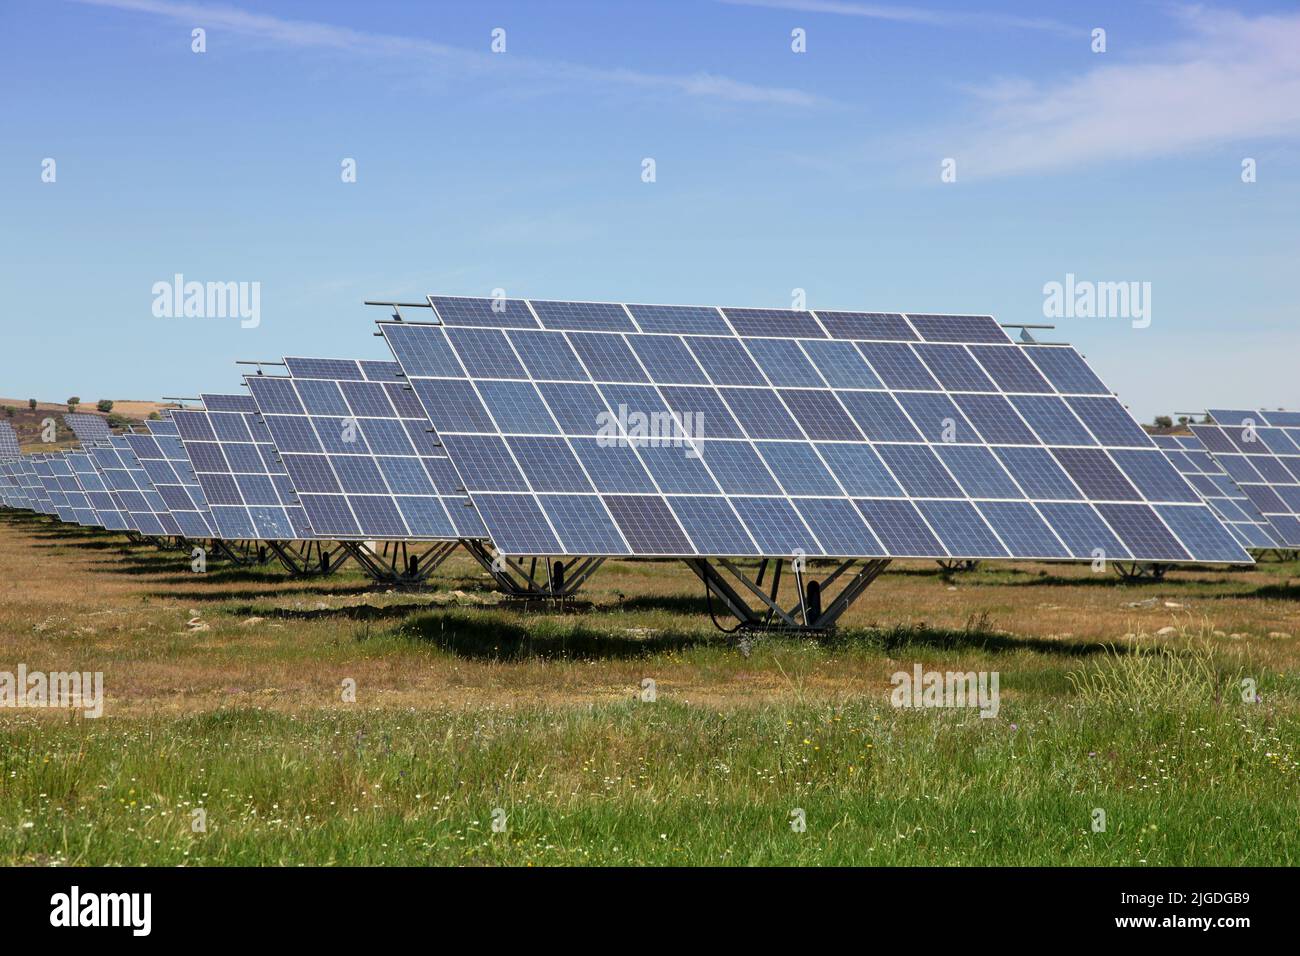 Large scale solar farm in Spain. Solar energy is becoming an important part of the energy mix. Stock Photo